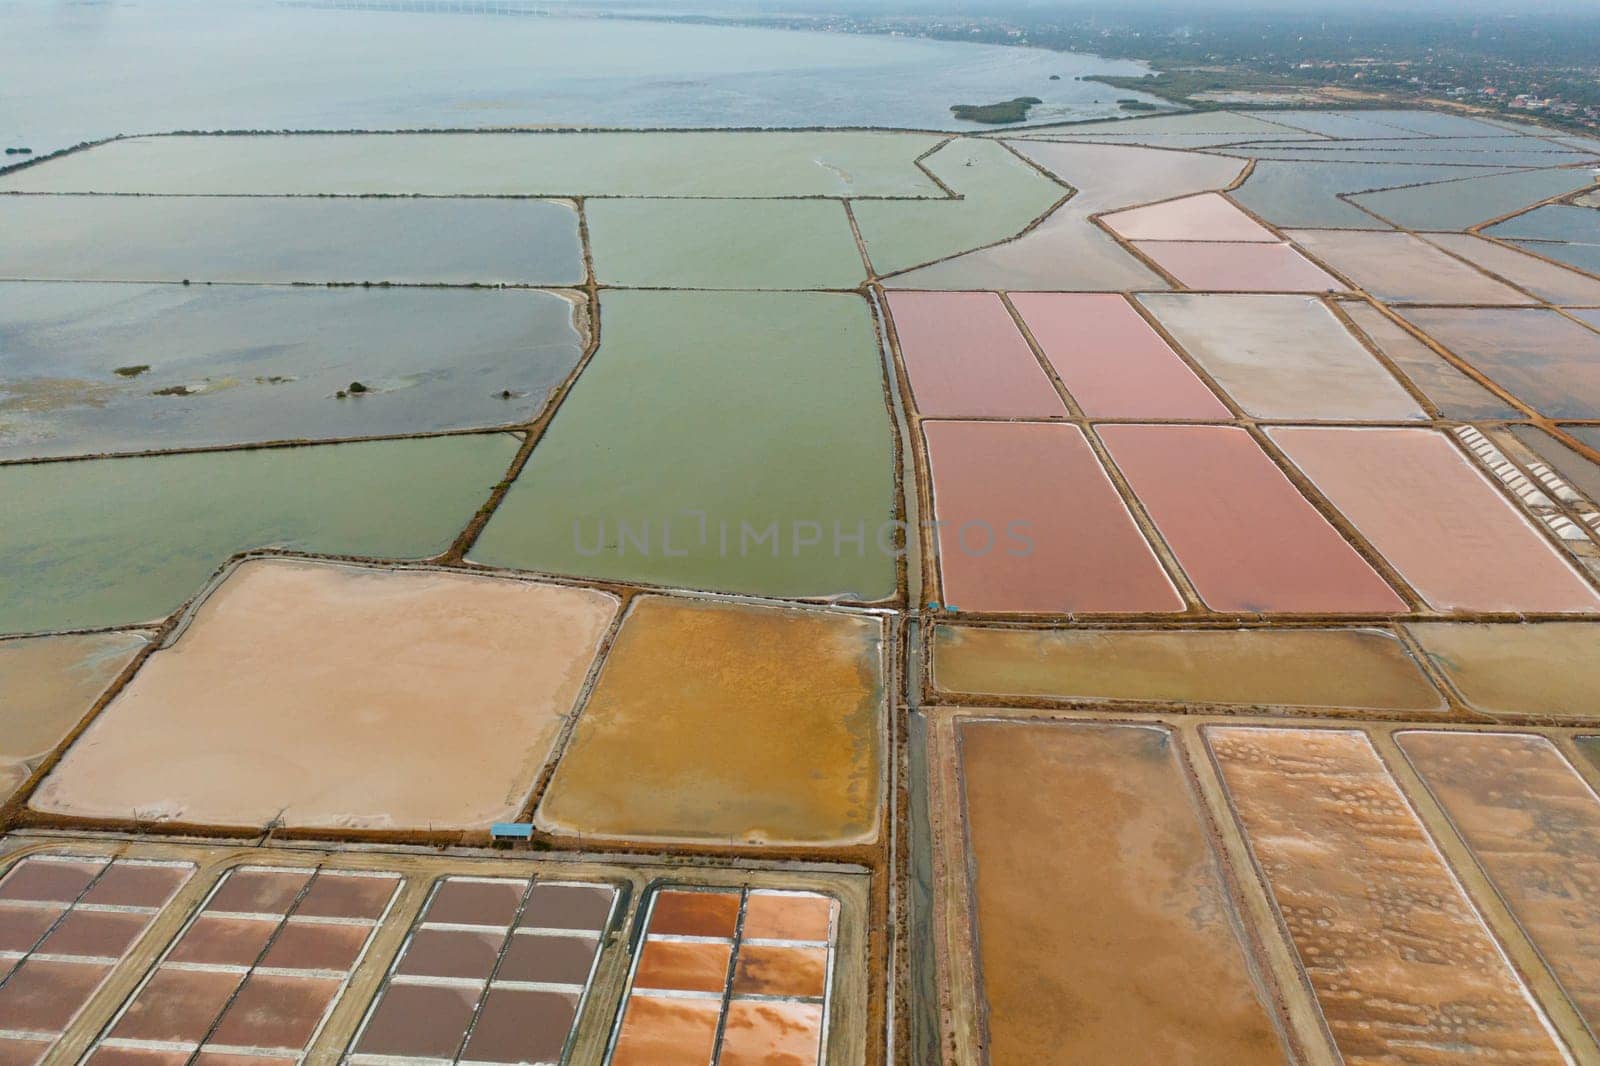 Pools with water for evaporation, extraction and production of salt in Sri Lanka.